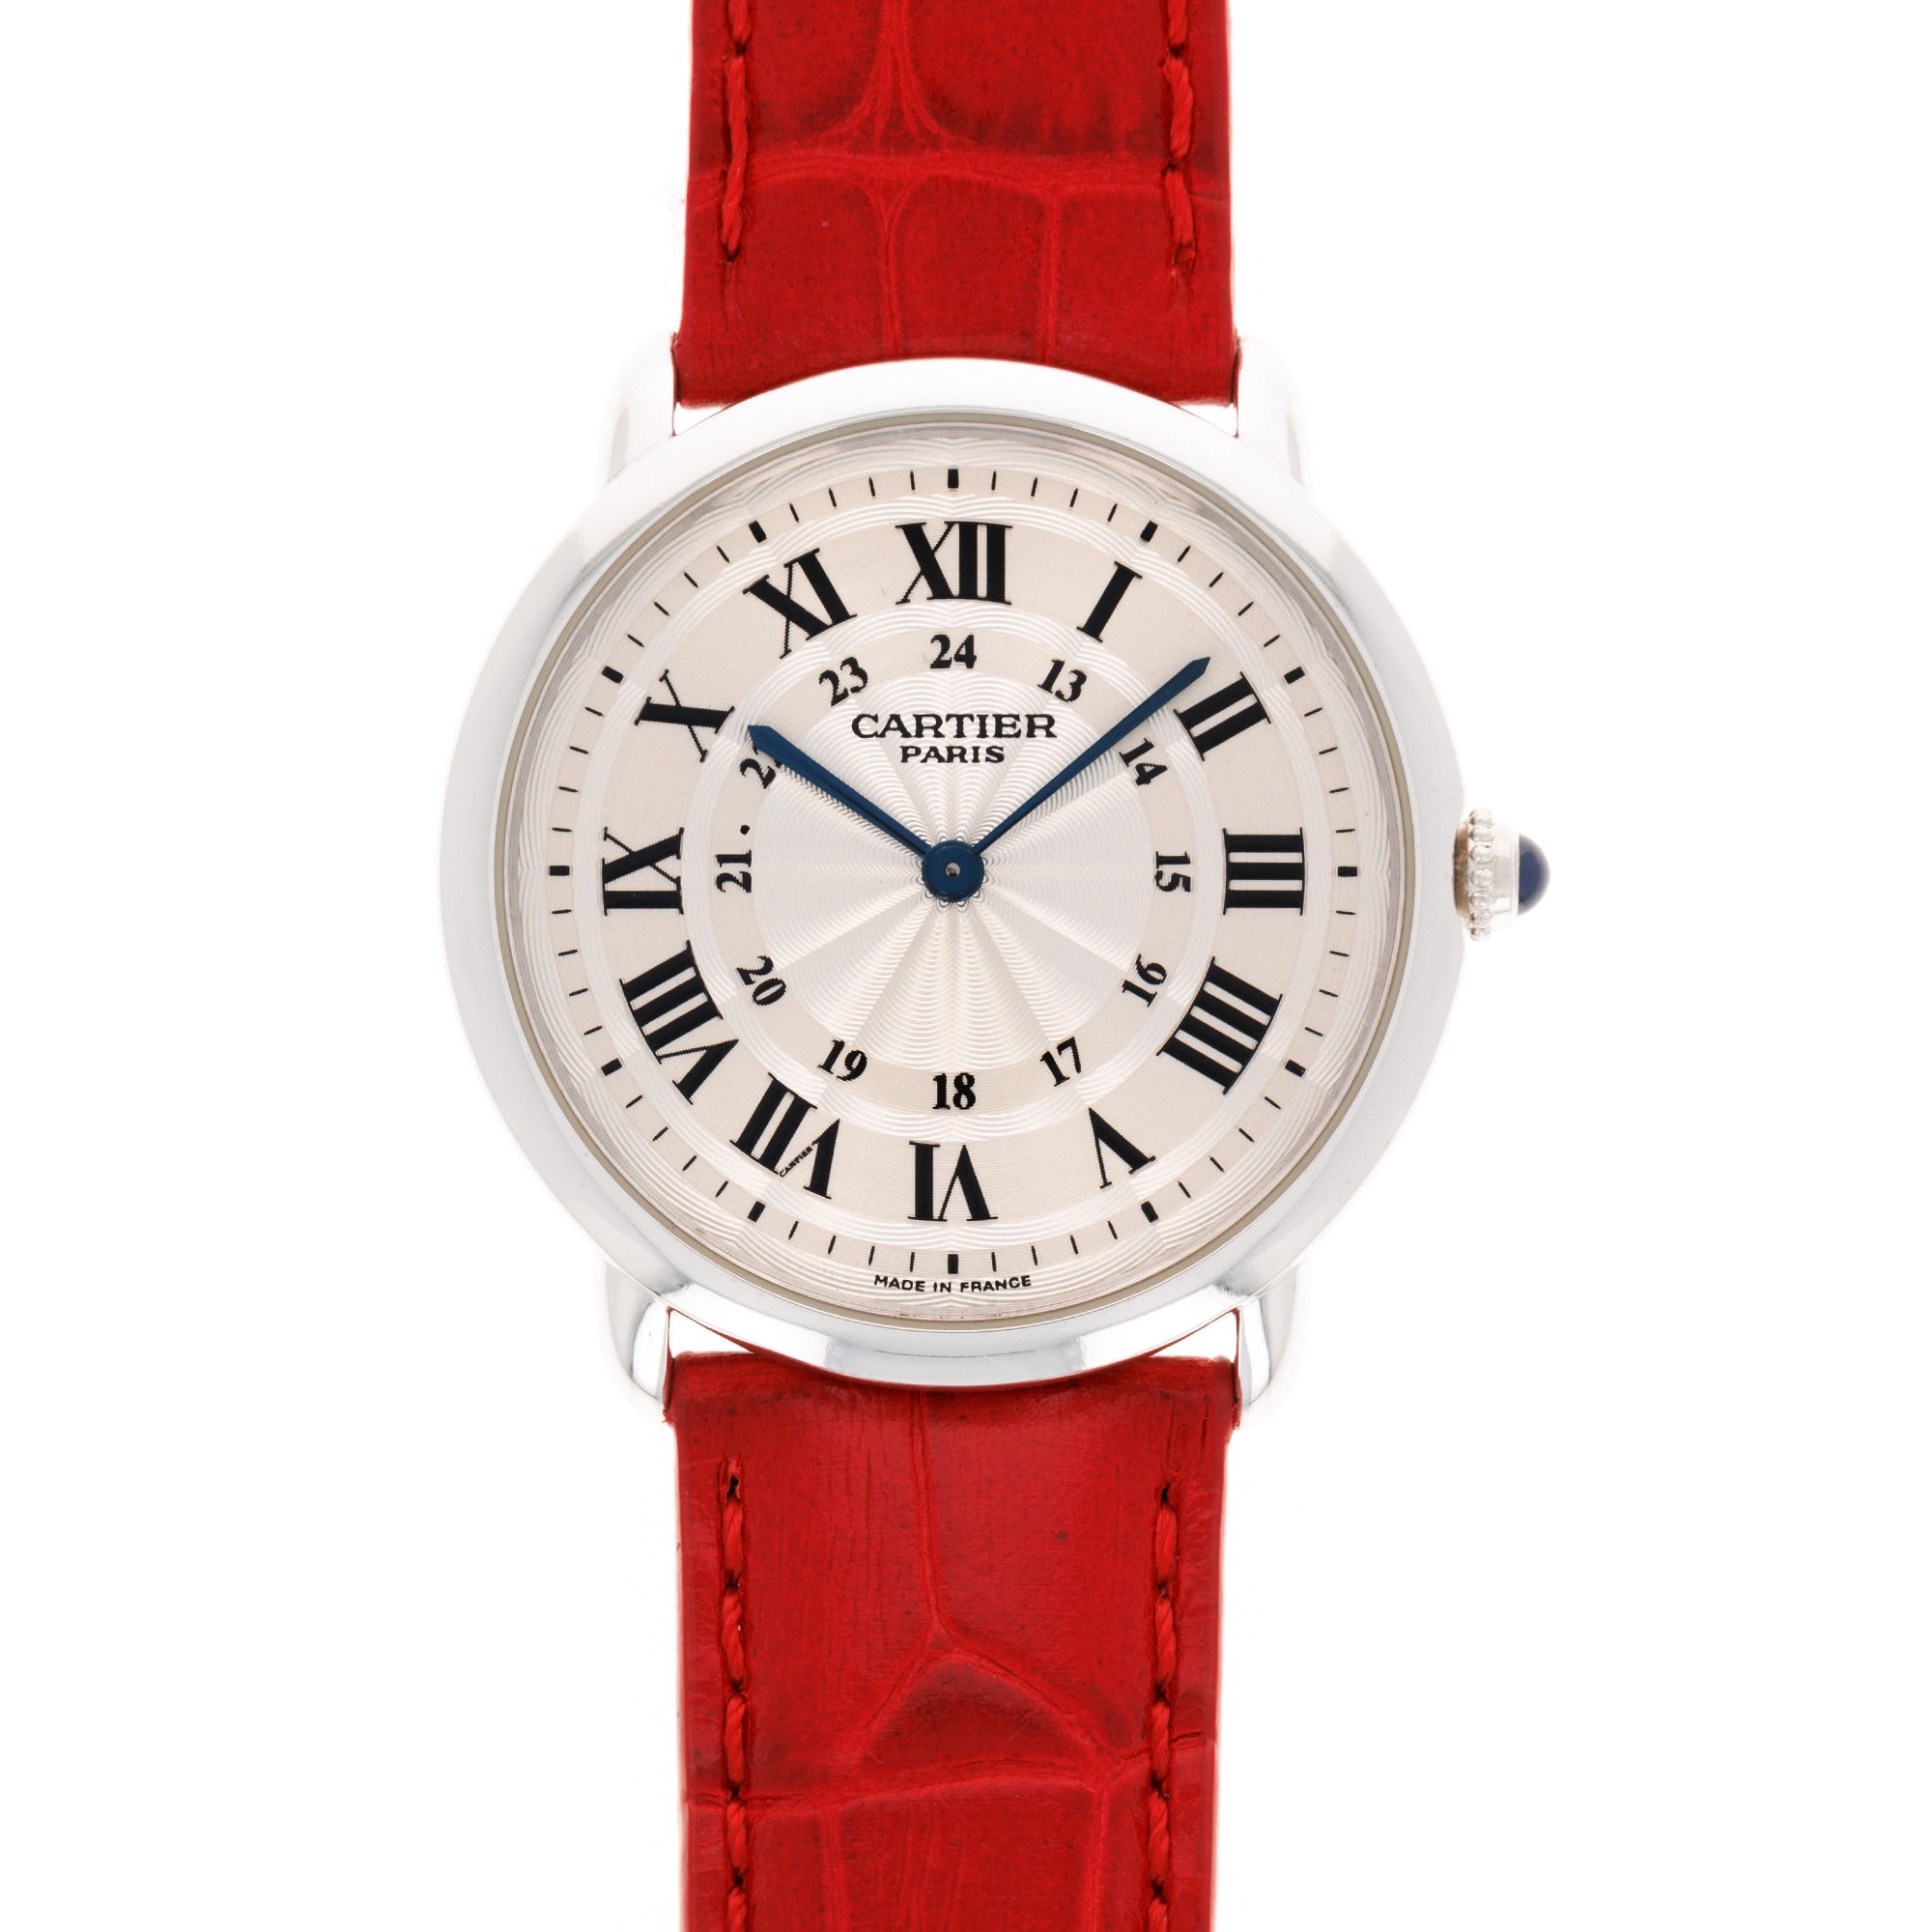 Cartier - Cartier Platinum Ronde Louis Ref. W1528051 CPCP Collection - The Keystone Watches